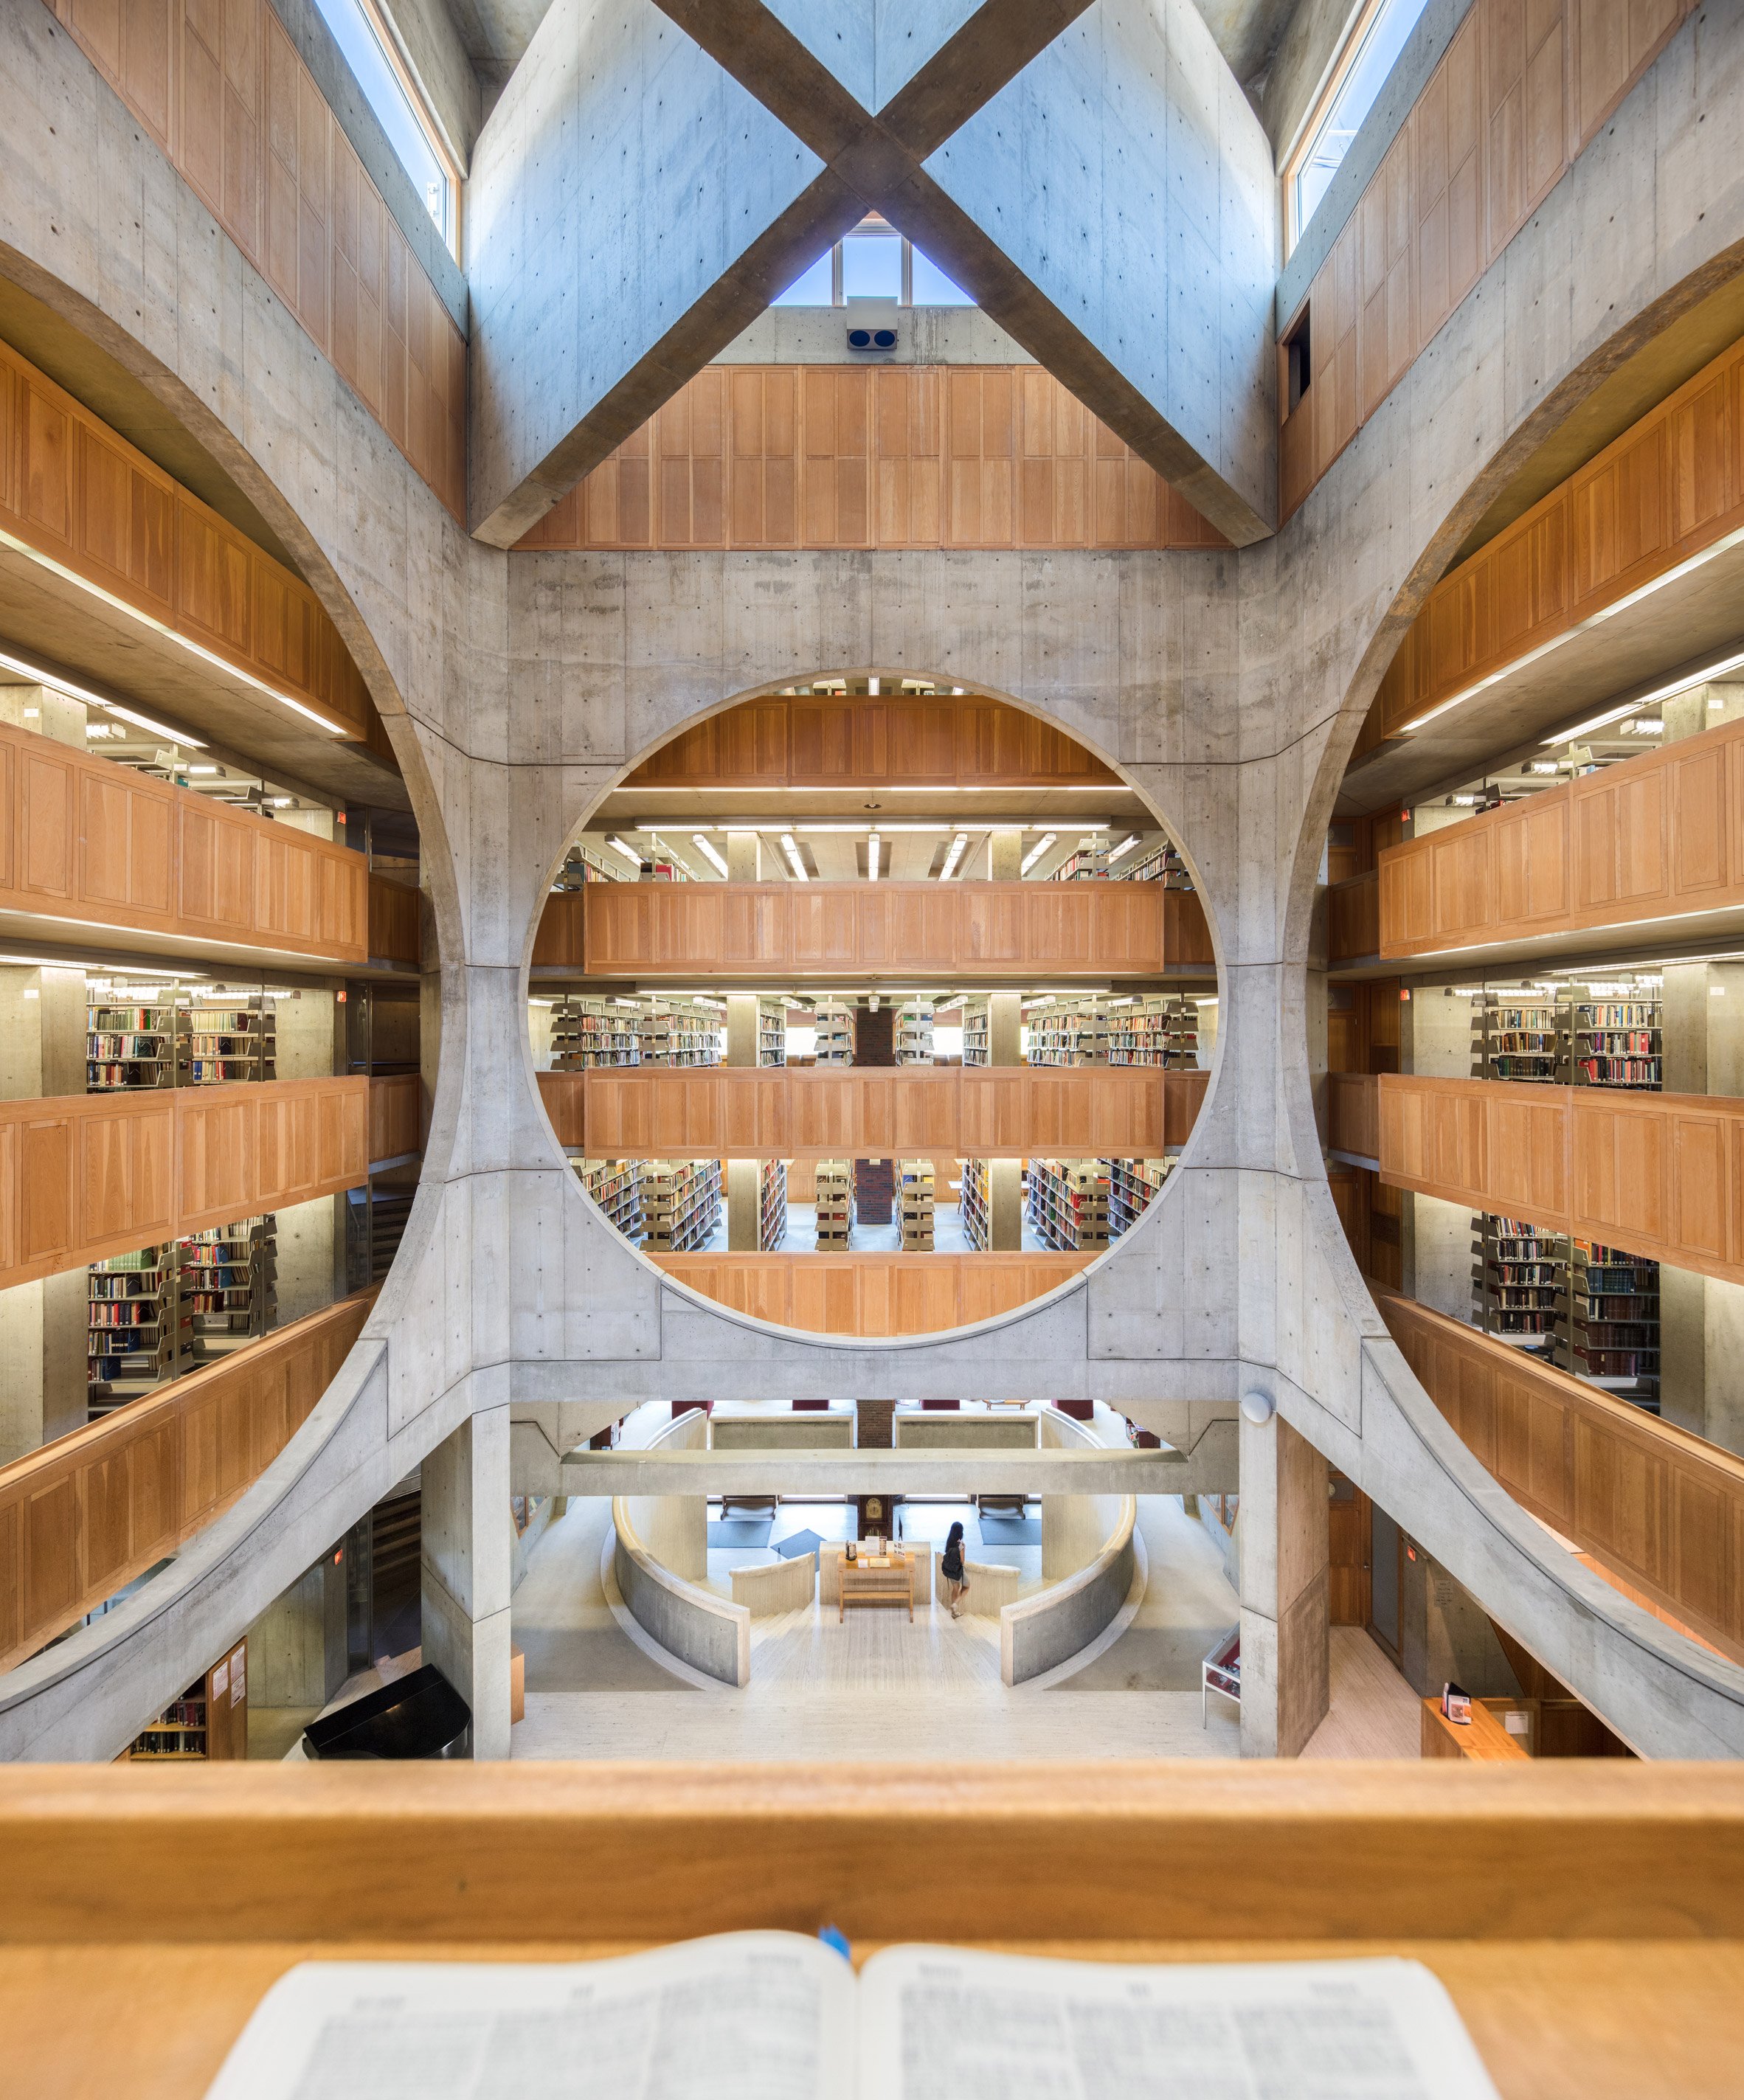 Phillips Exeter Academy Library by Louis Kahn, Exeter, New Hampshire